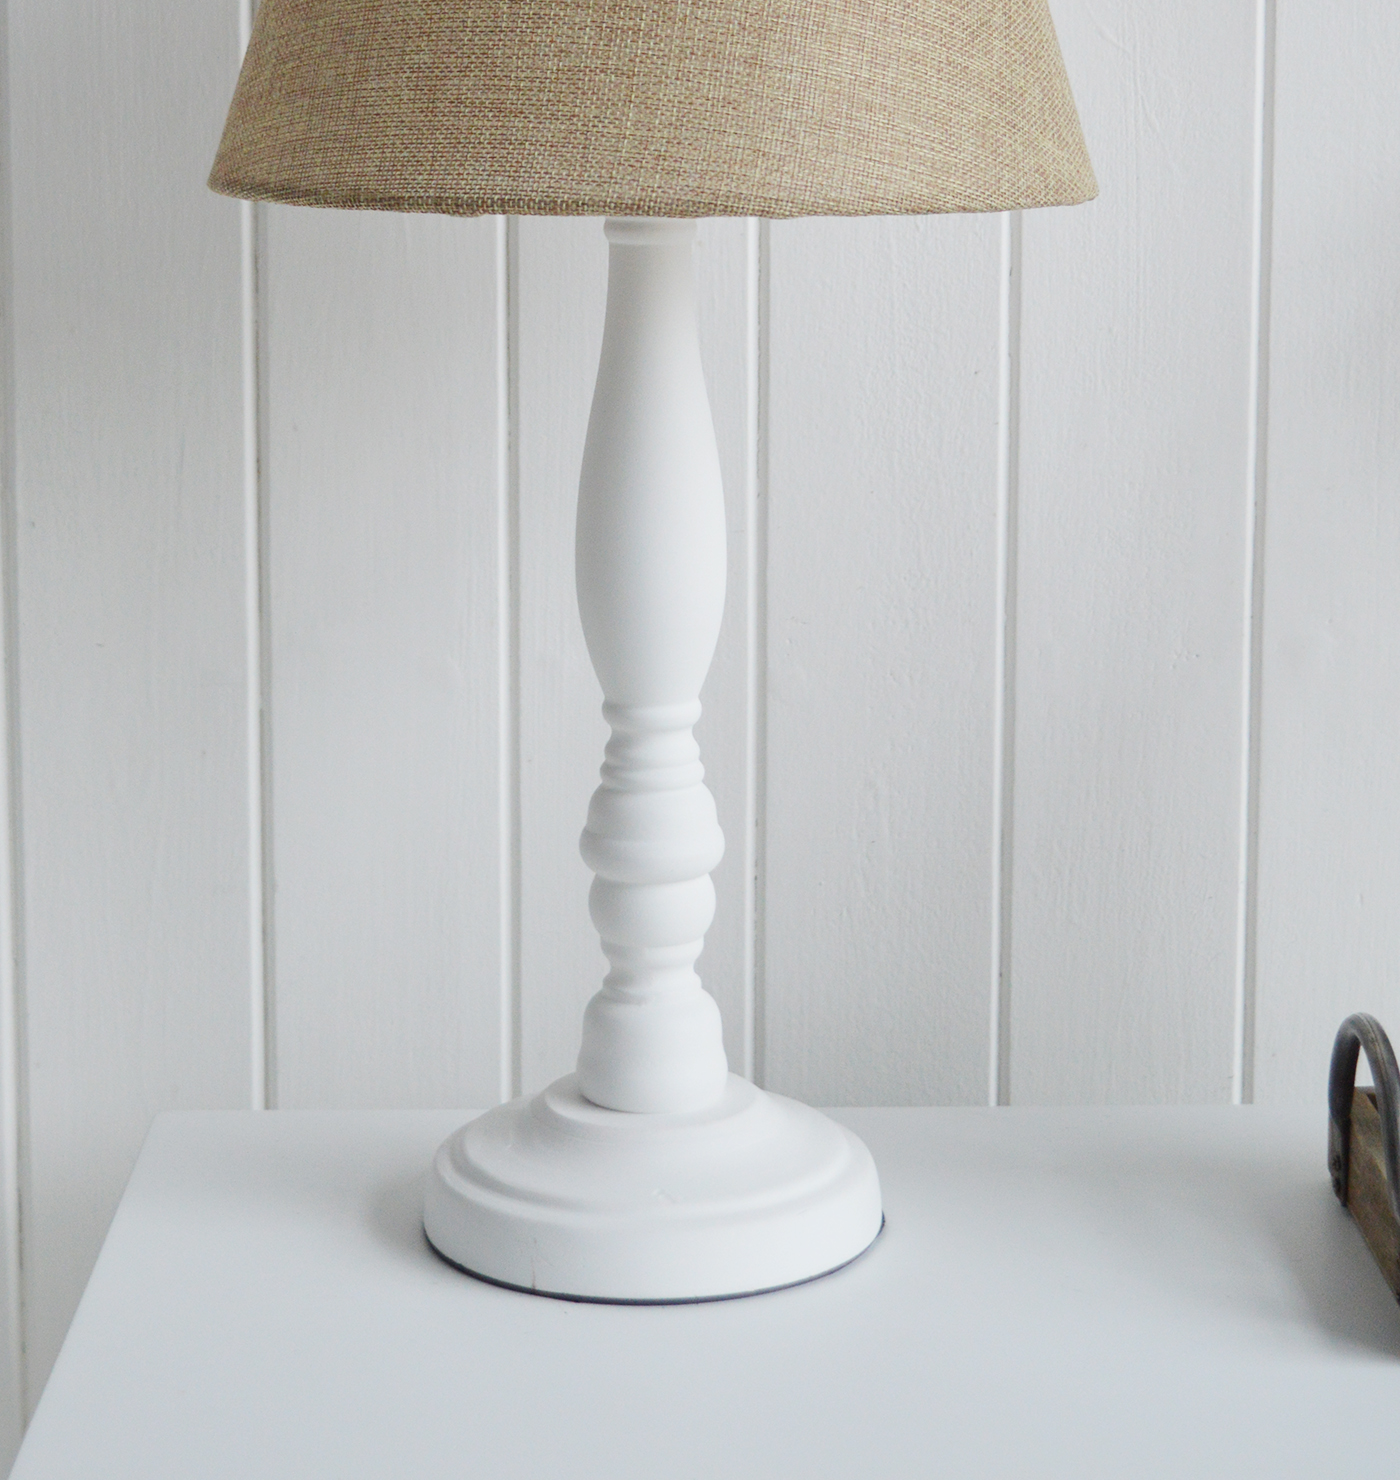 Brentwood Natural and White Wooden Table Lamps from The White Lighthouse for New England, Country, Coastal, City and White interiors for hallway, living room, bedroom furniture